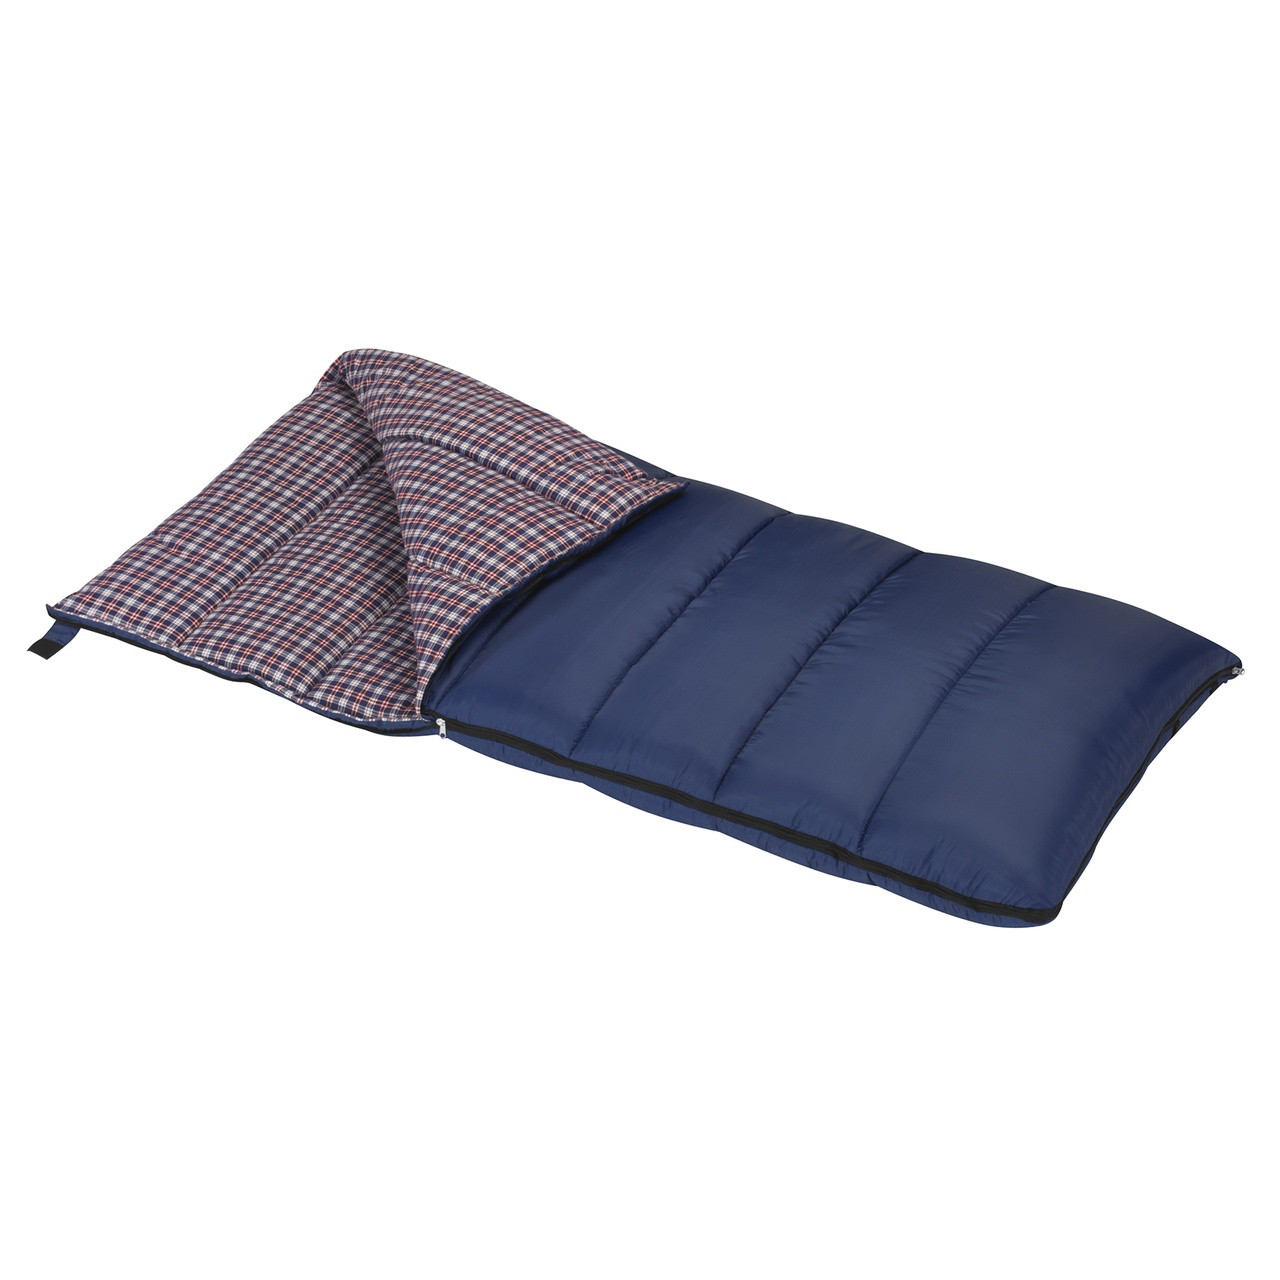 Wenzel Blue Jay 25 degree sleeping bag, blue, partially unzipped and folded over showing the blue and white plaid interior